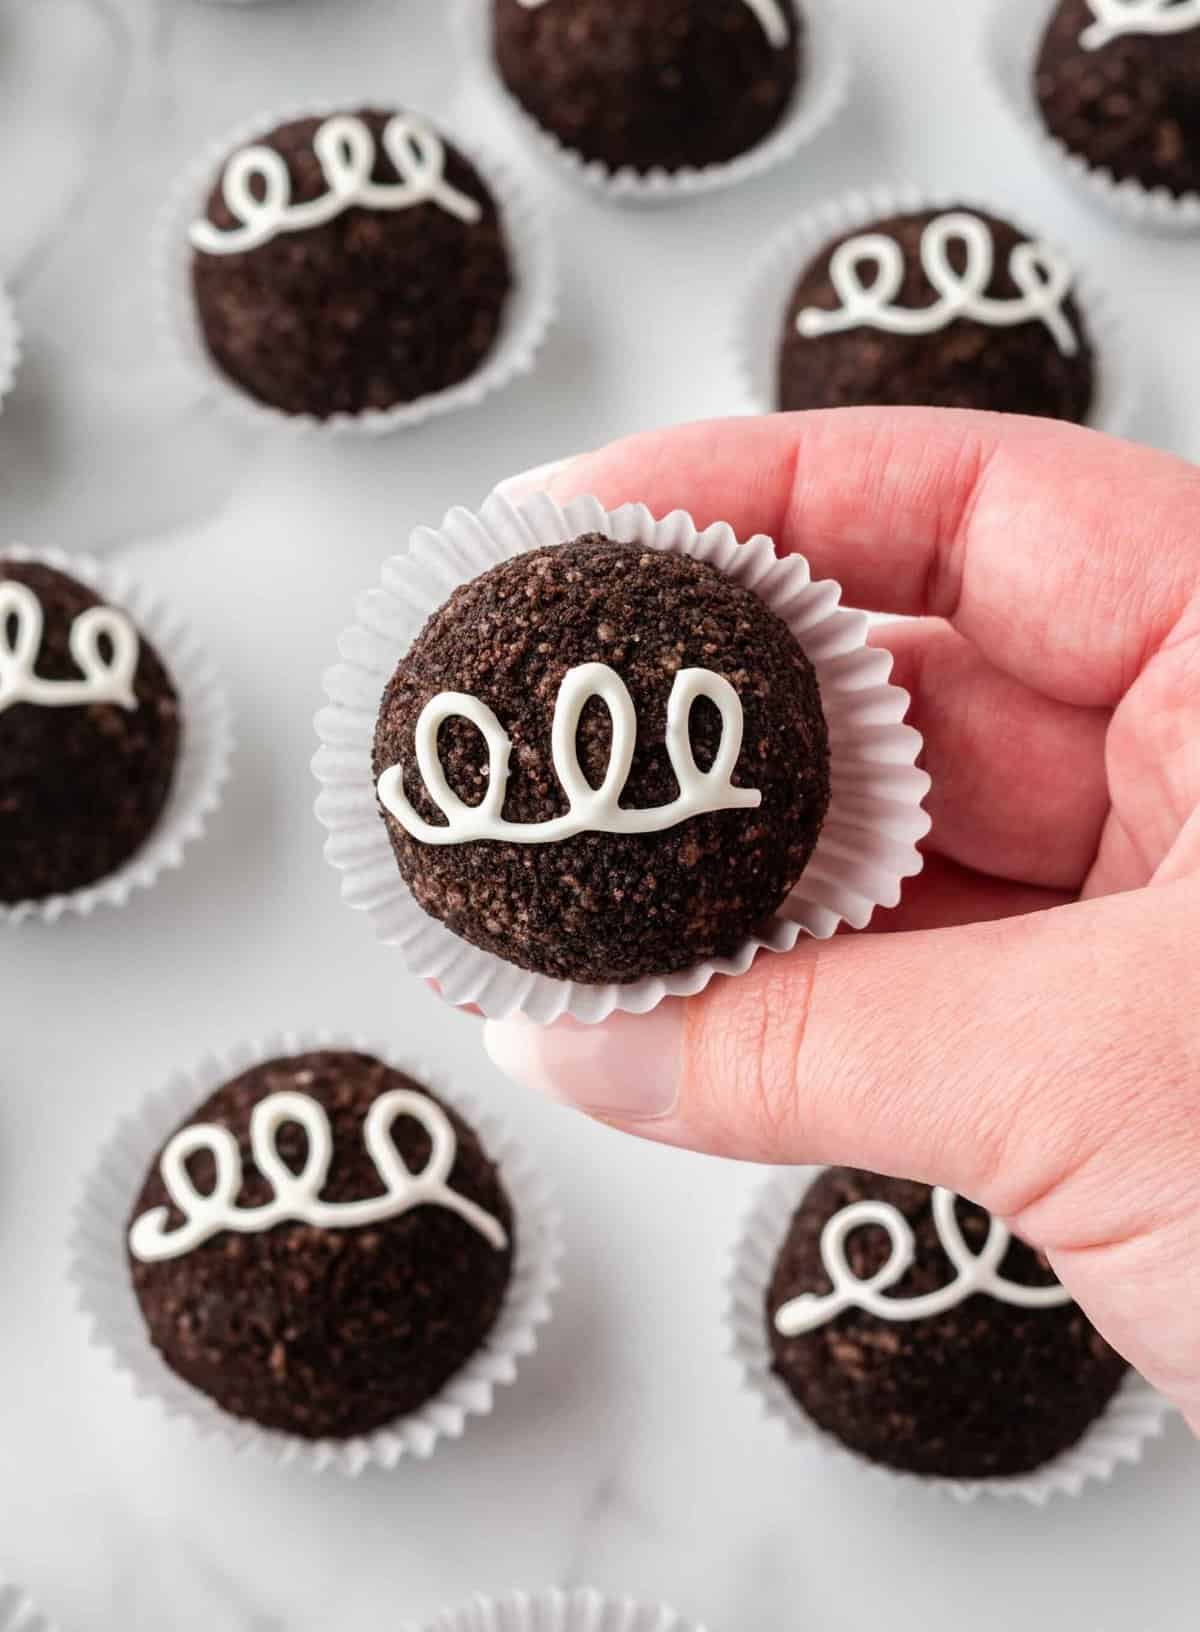 oreo balls without dipping in chocolate, decorated as little debbie cupcakes